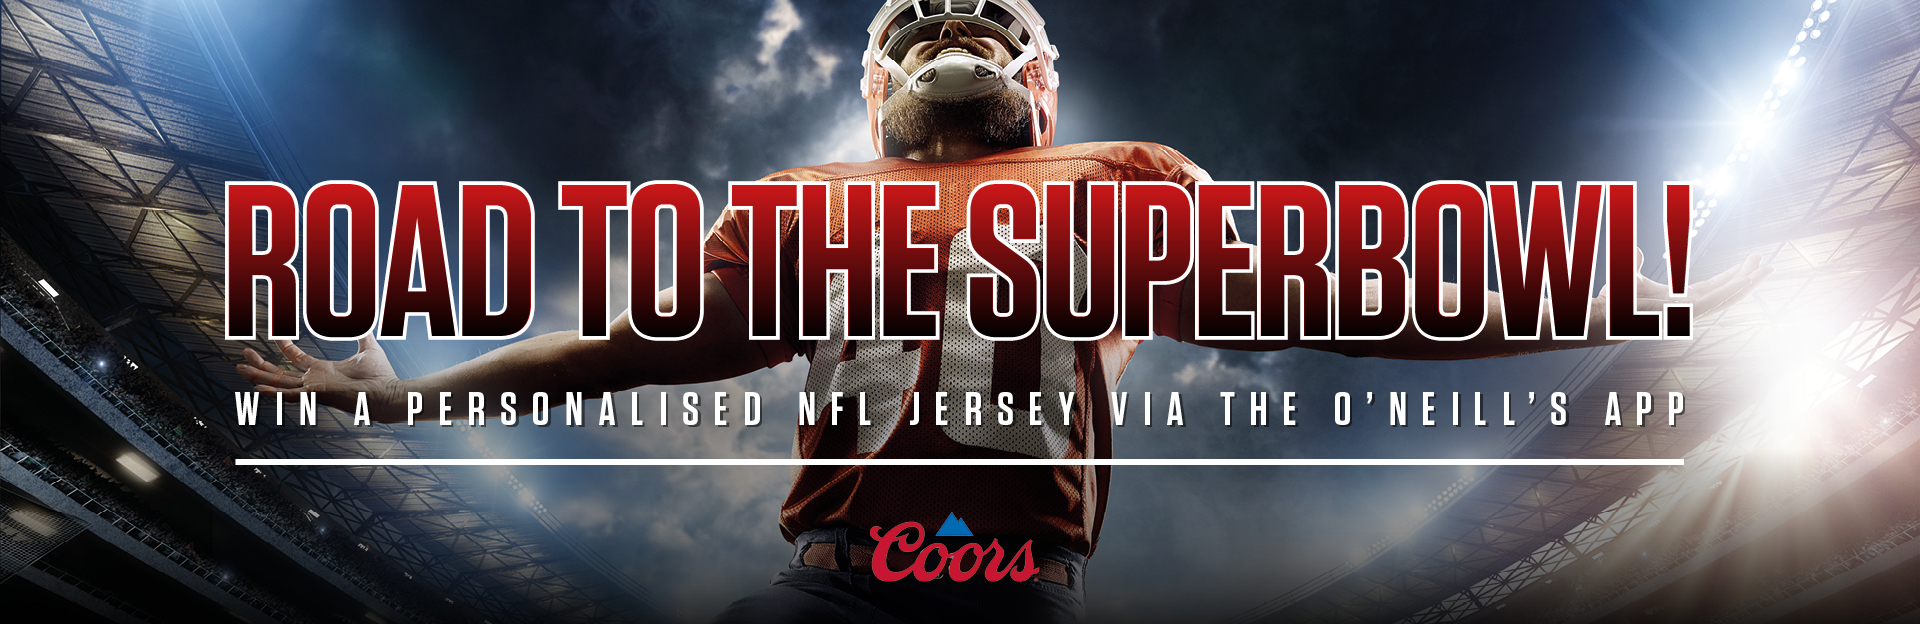 Watch NFL at The George Inn